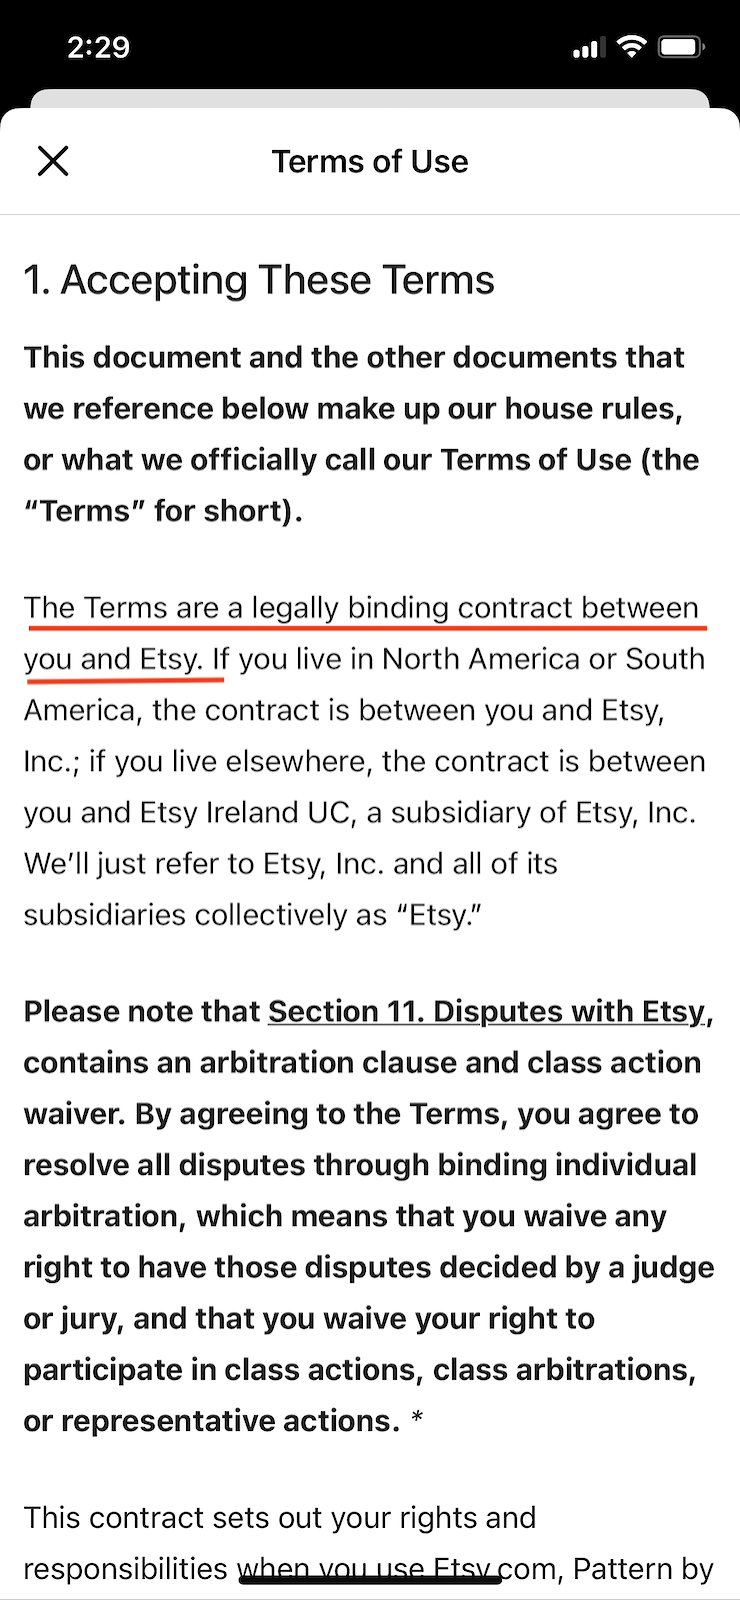 Etsy-terms-and-conditions-browsewrap-method-of-consent